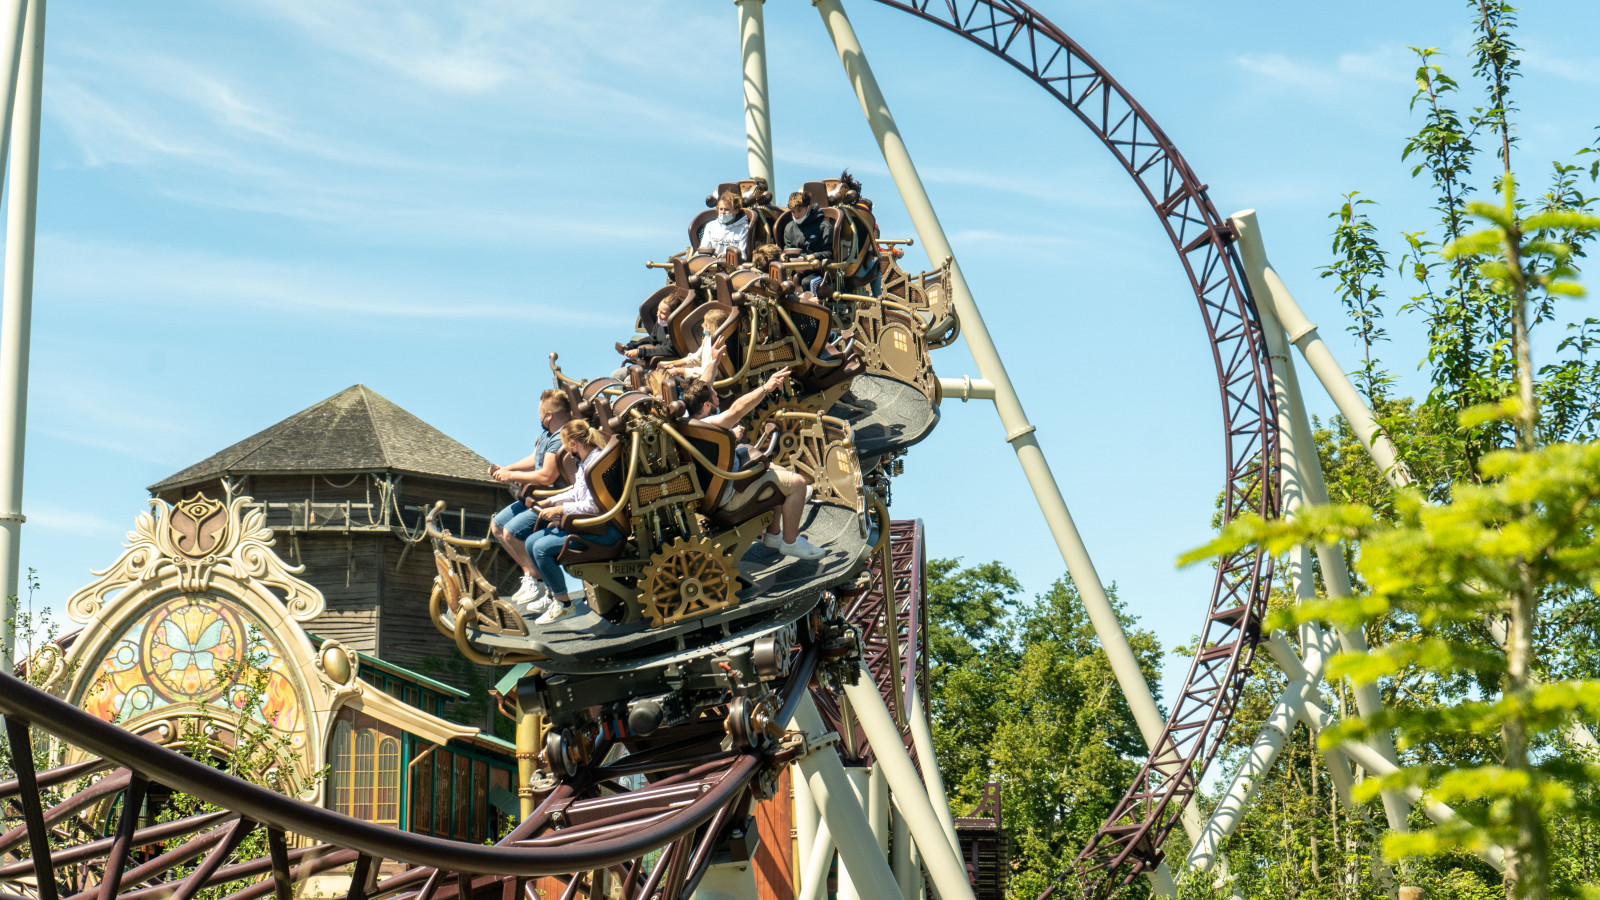 The Ride to Happiness is 'Europe's Best New Coaster'